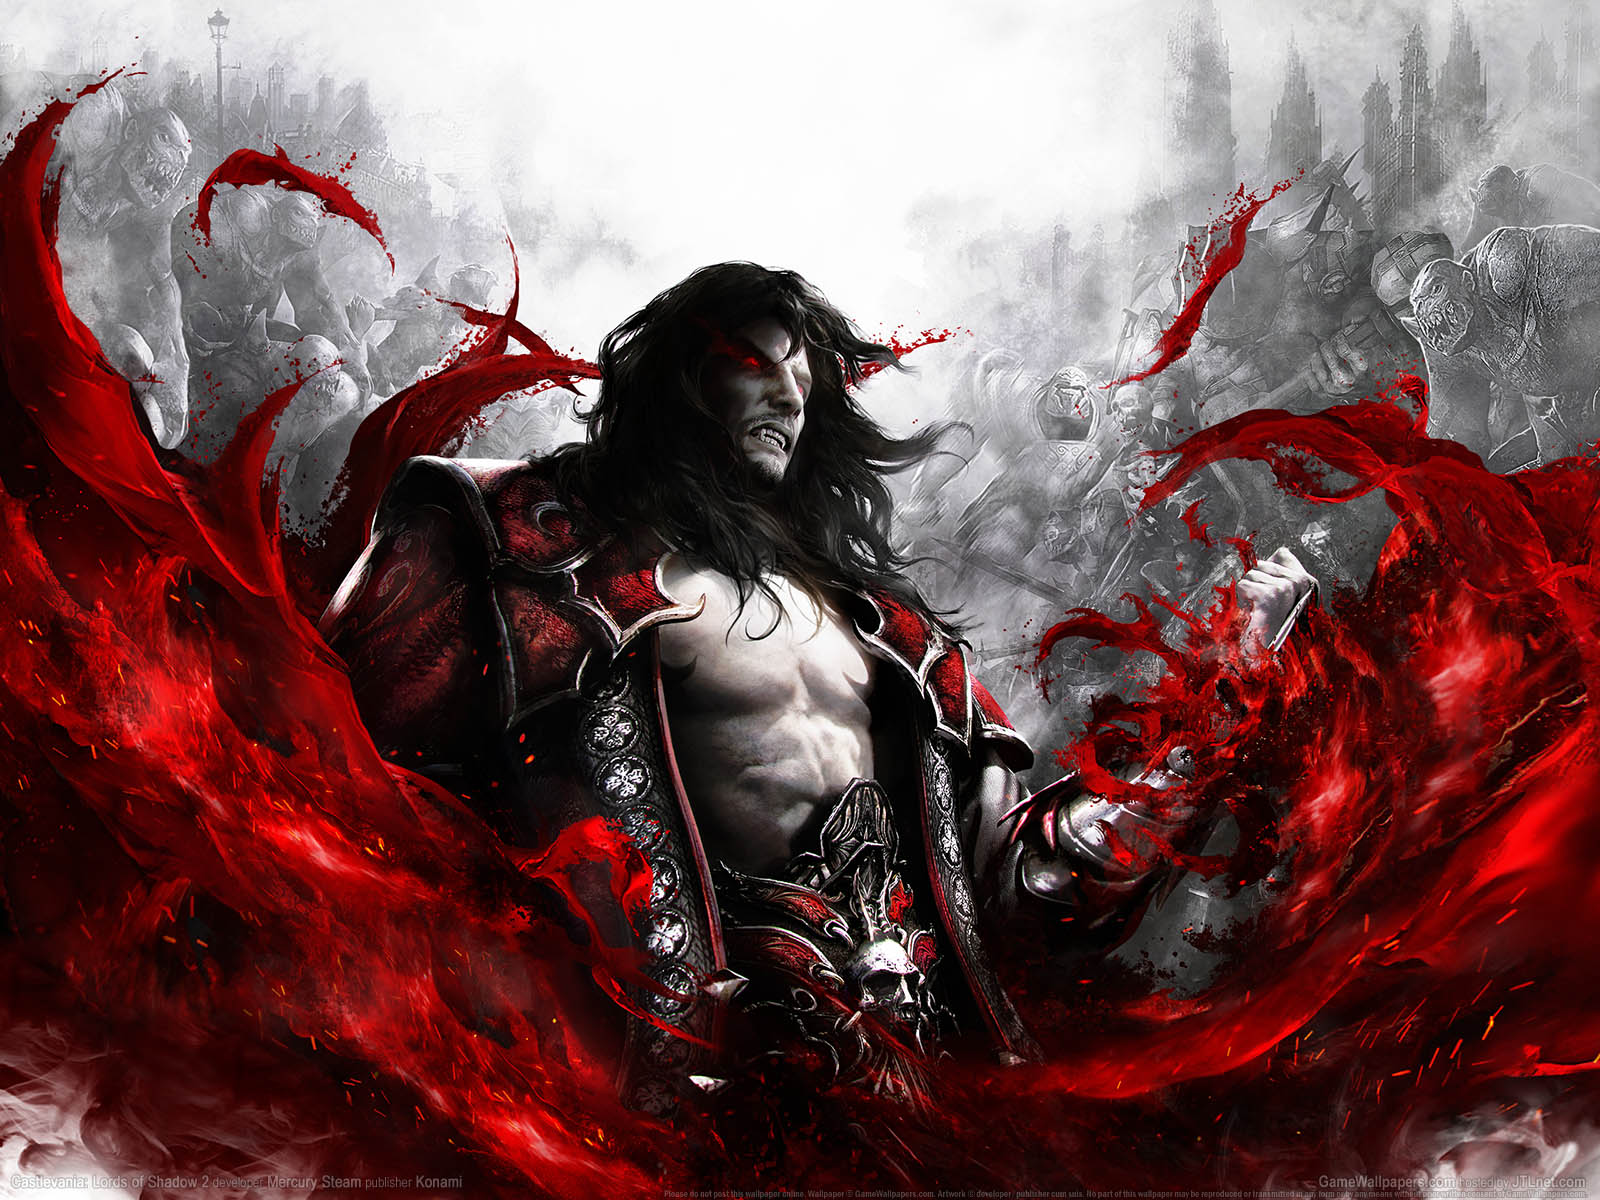 Castlevania%253A Lords of Shadow 2 wallpaper 03 1600x1200